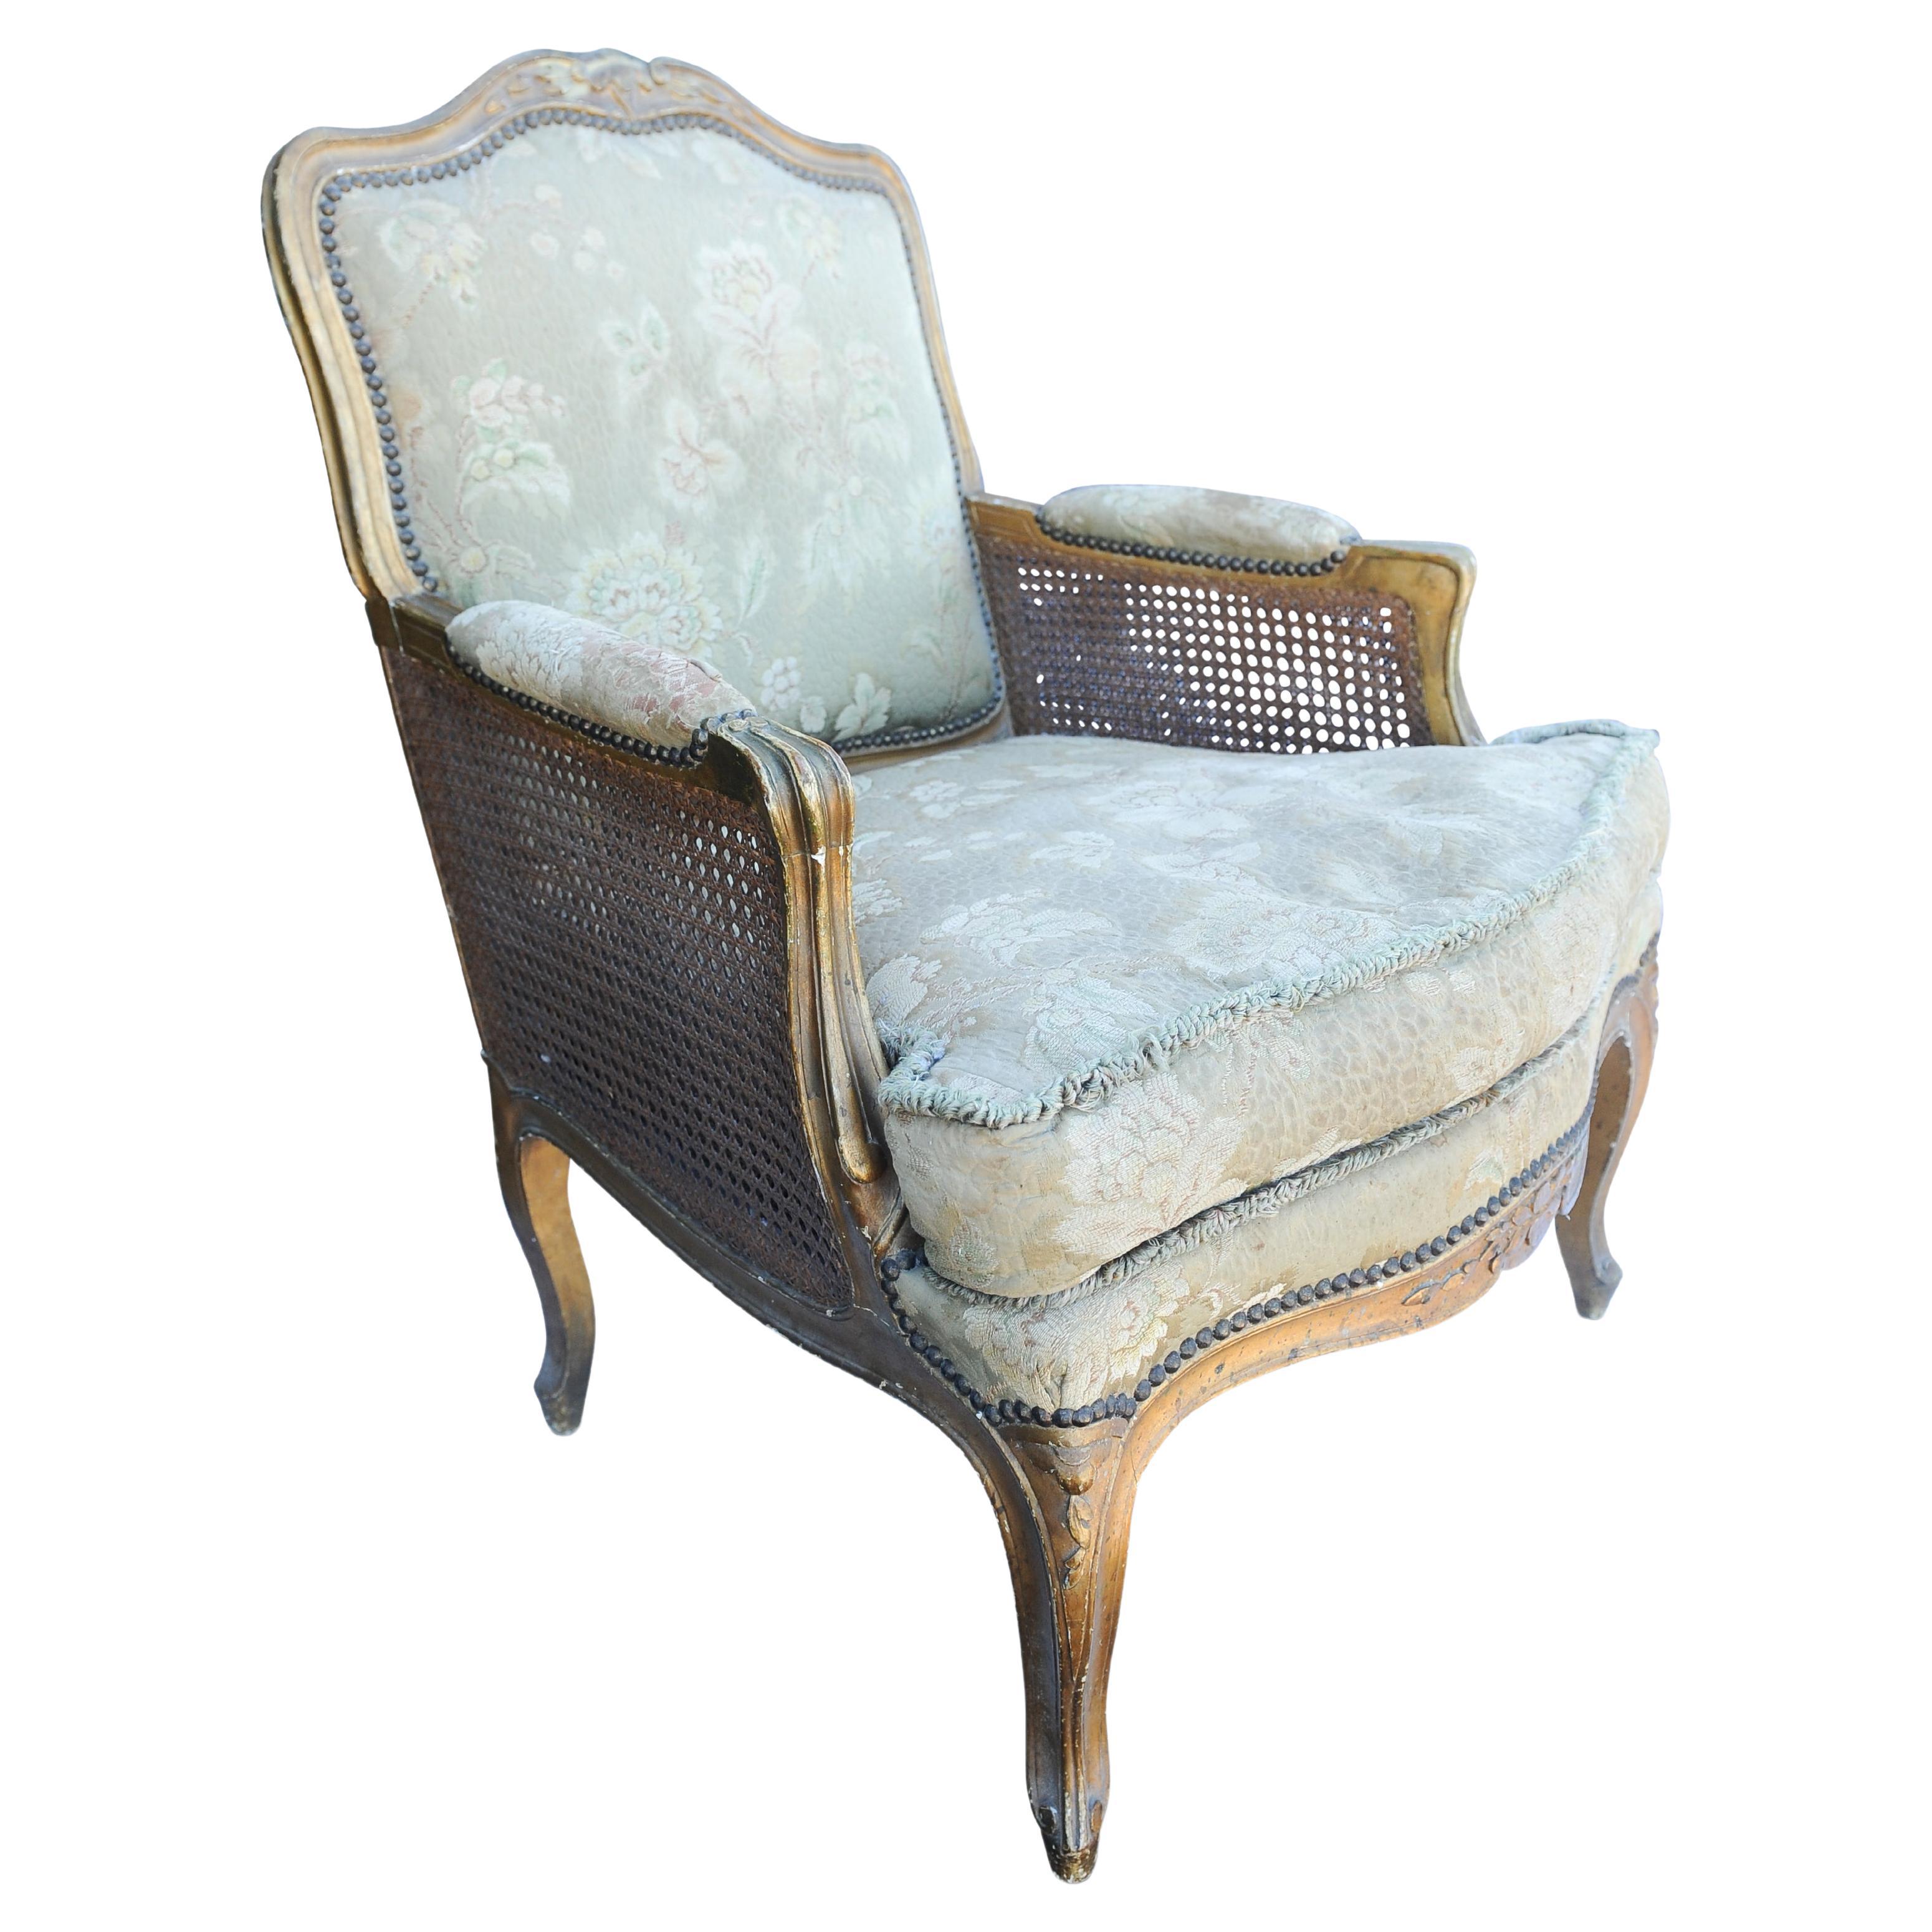 Antique 19th century French gilded Bergere armchair with stud detailing.
Silk Damask Cushions with tassel borders.
Embroidered hardBoard with cane surround.
Louis XV Design.

Height to arms 68cm Height to seat 37cm (43cm to cushion)